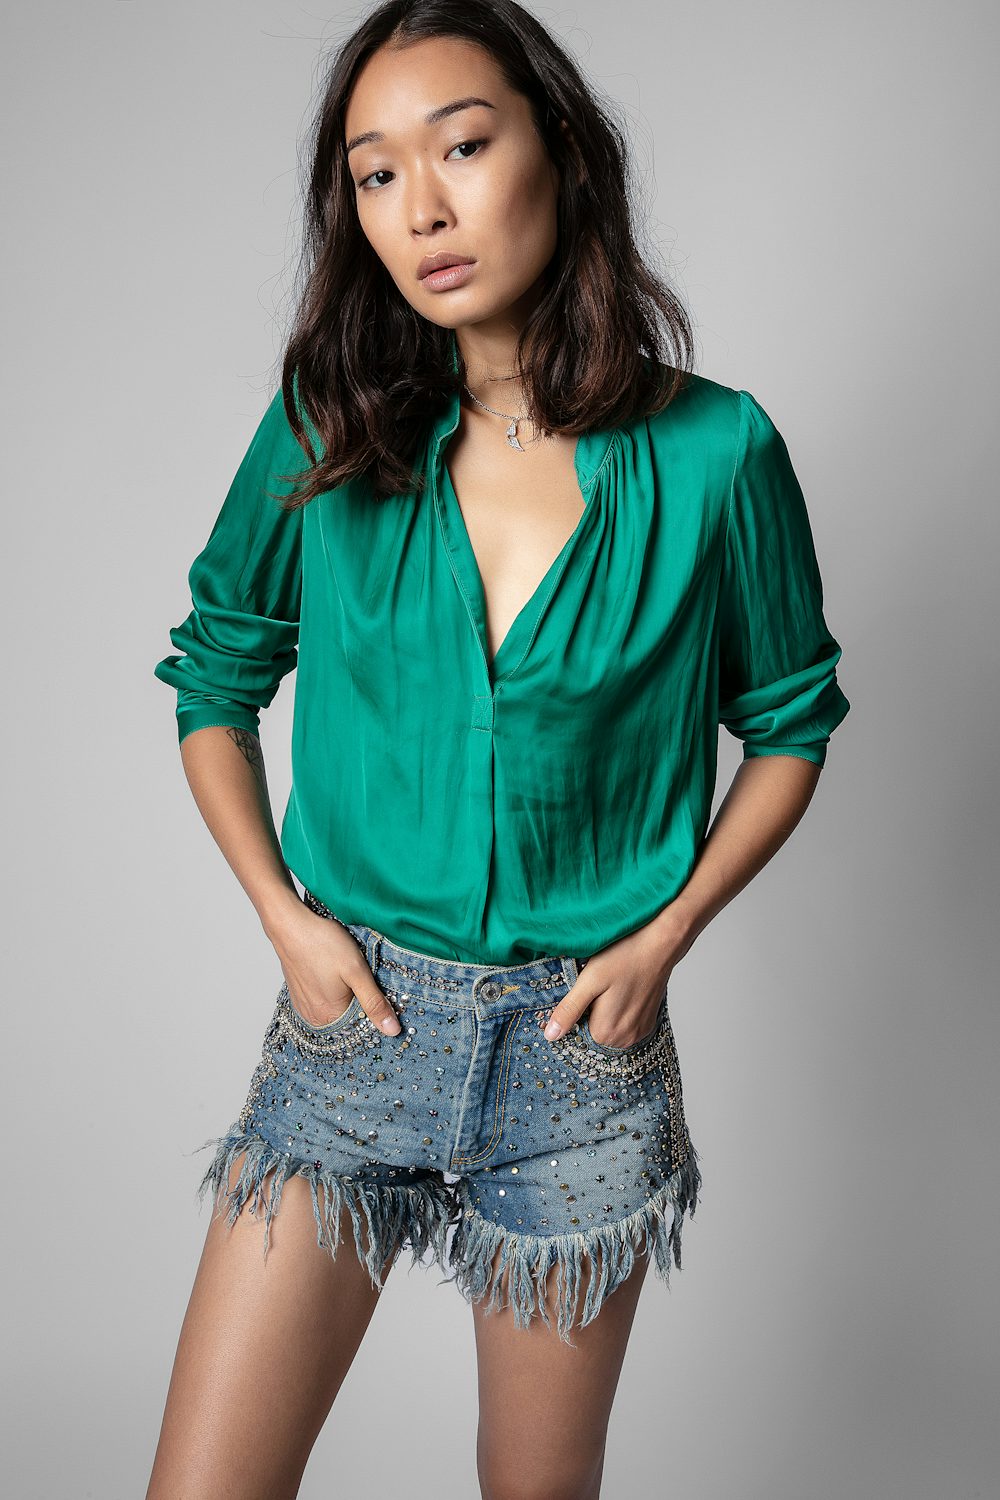 Women’s chic blouses, camisoles, shirts and tops | Zadig&Voltaire